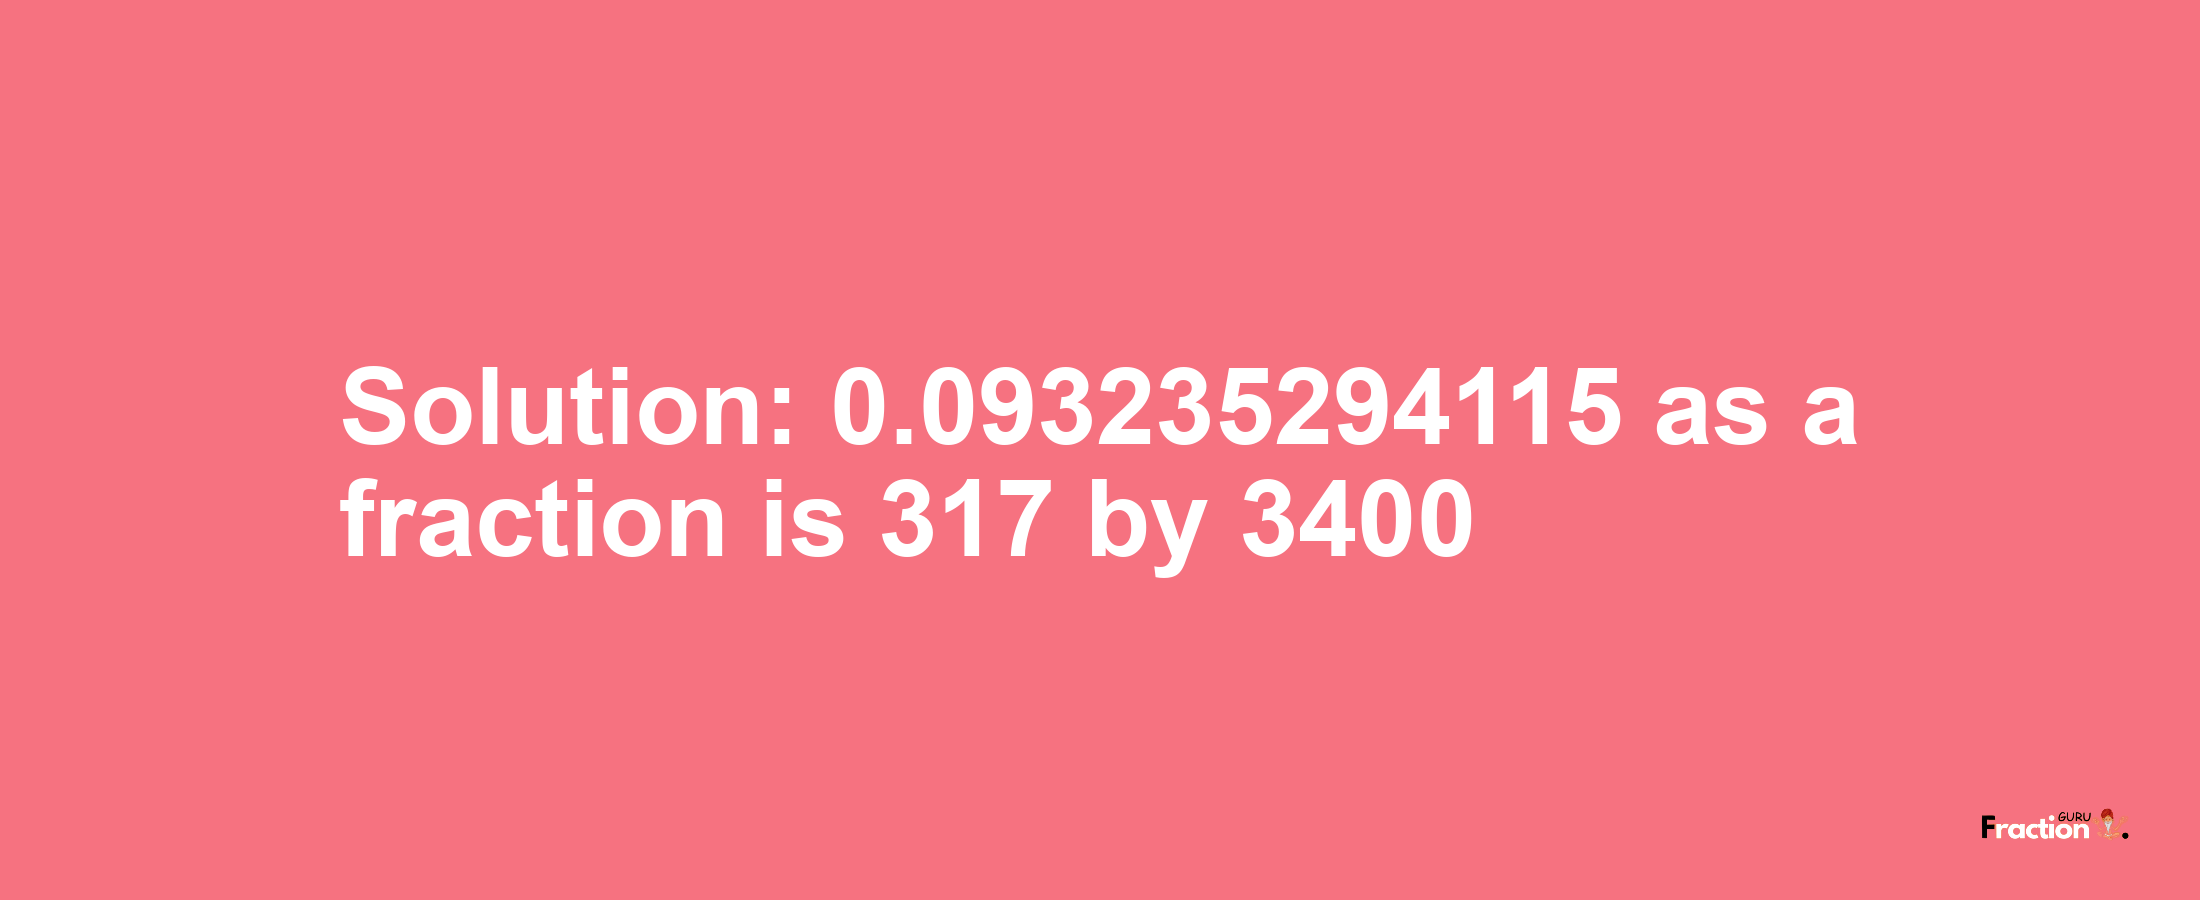 Solution:0.093235294115 as a fraction is 317/3400